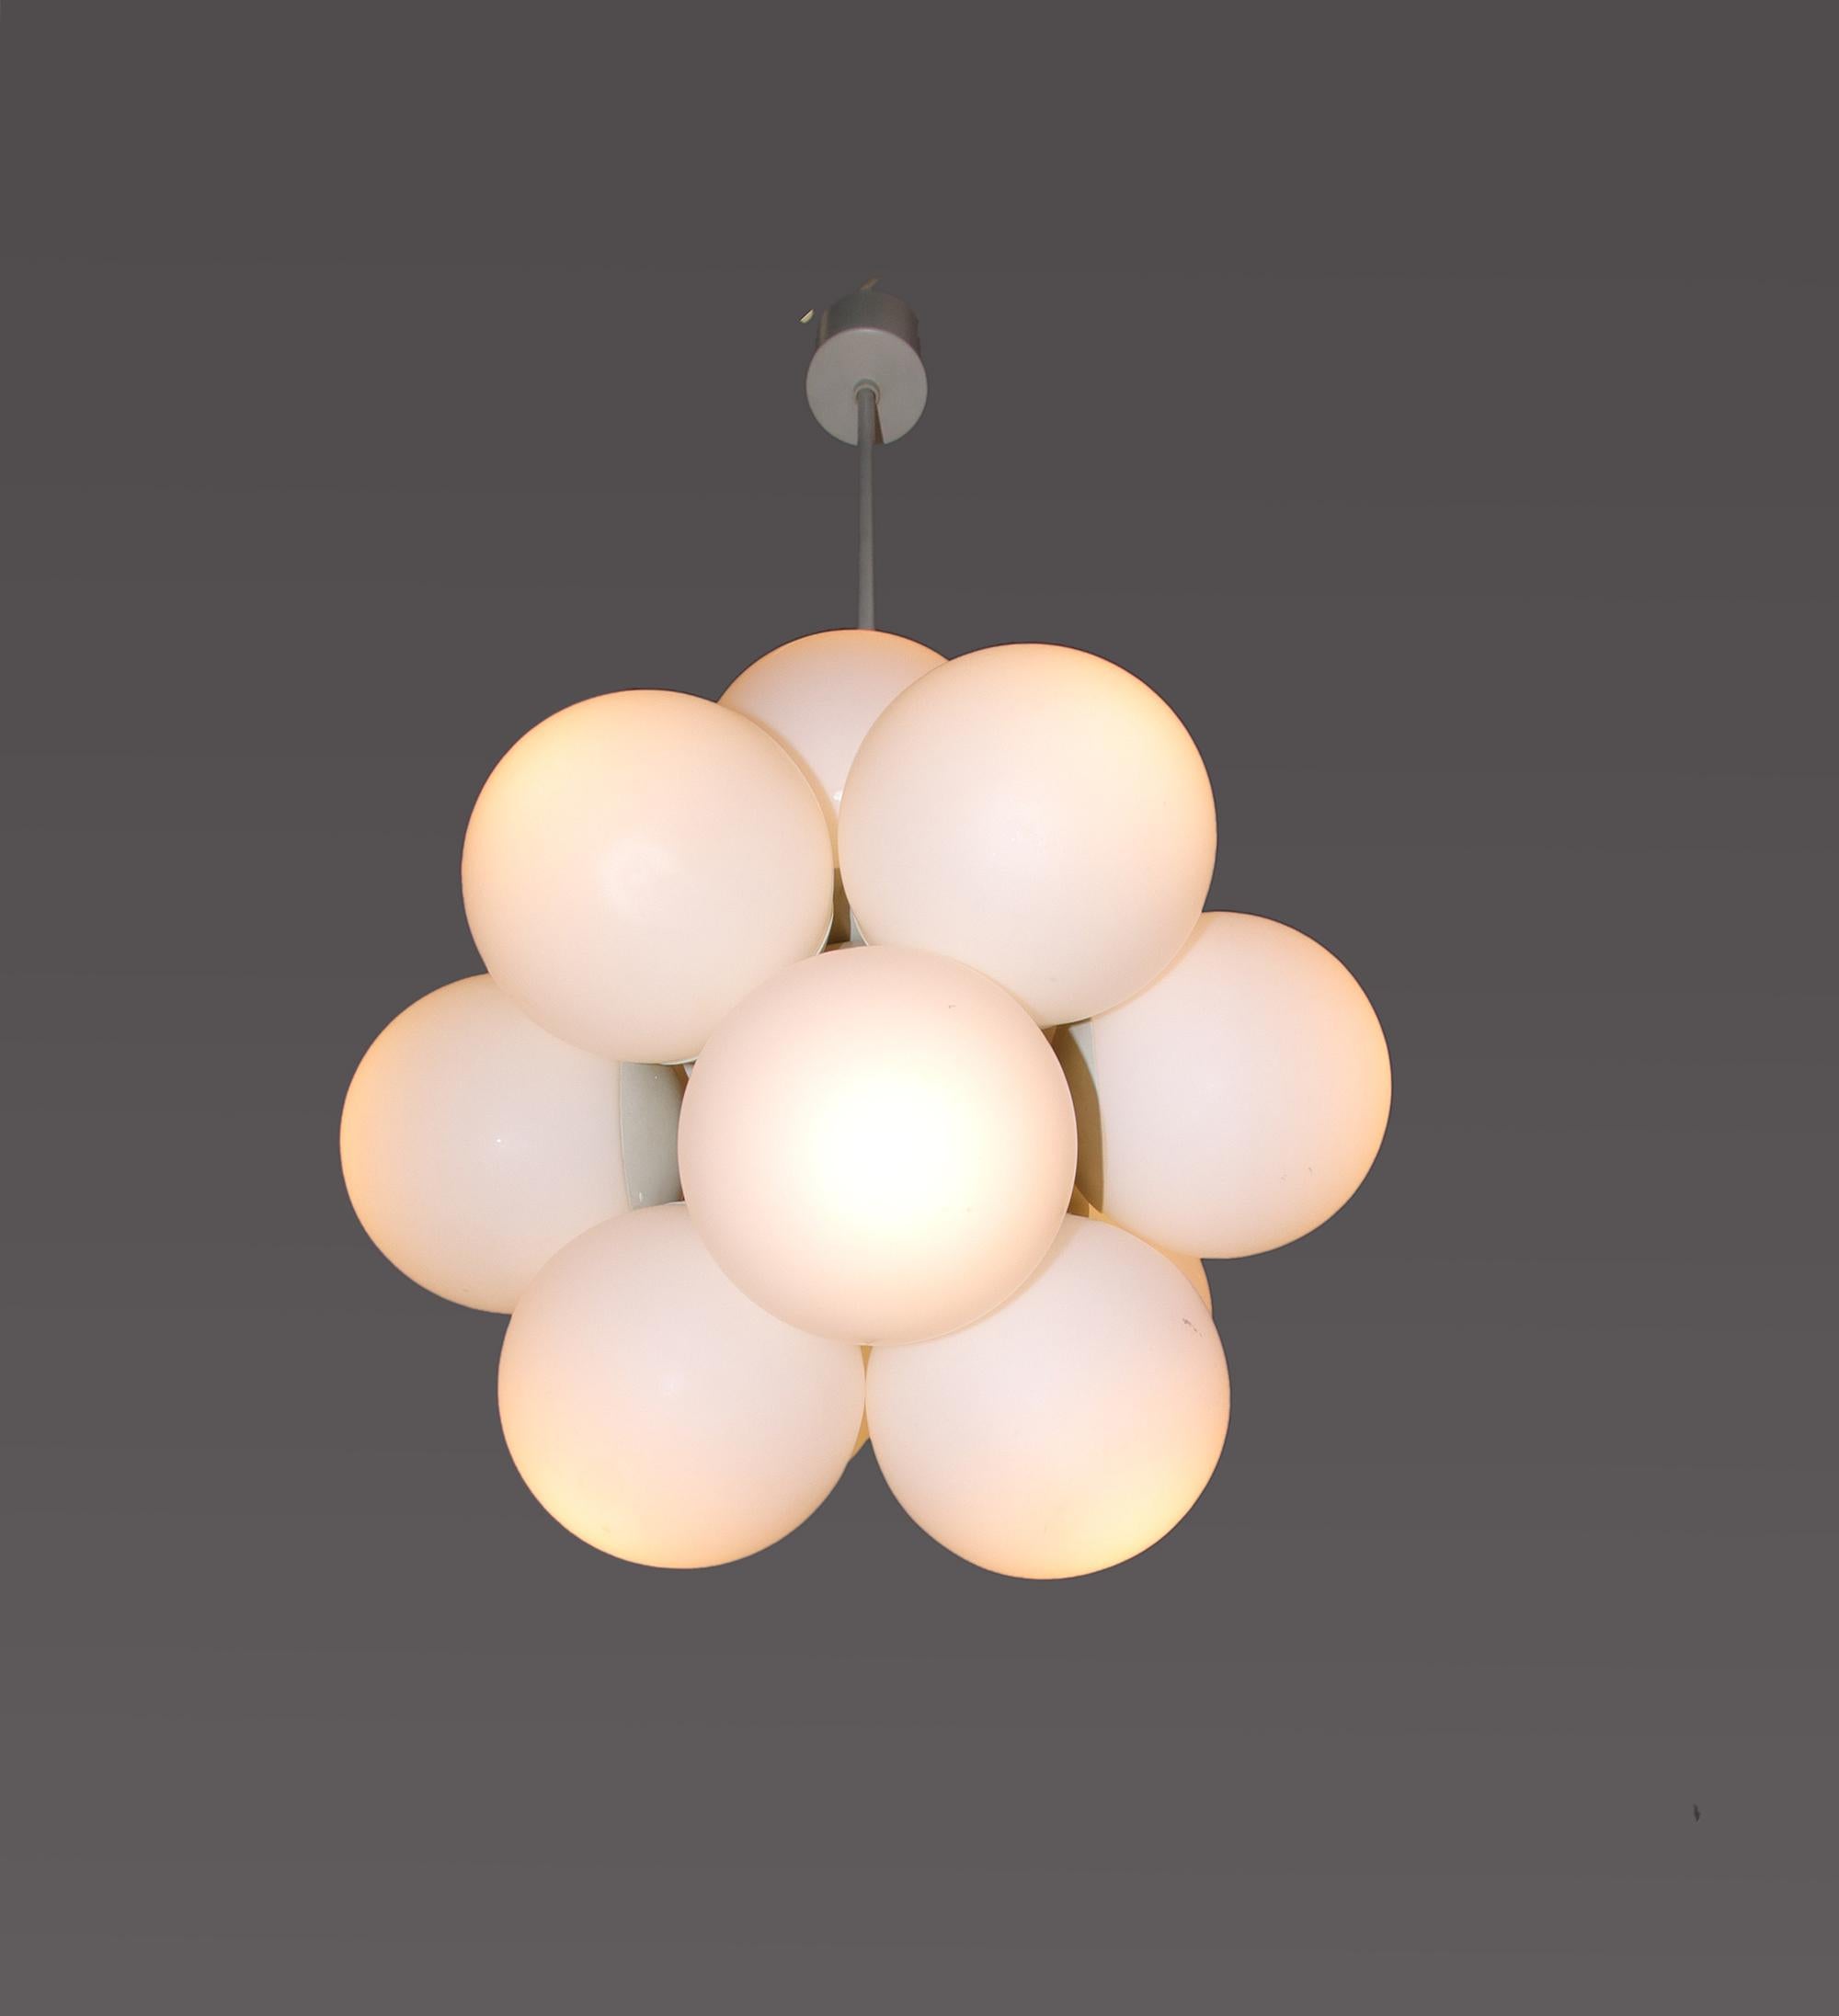 This gorgeous Mid-Century Modernist chandelier with 12 handcrafted double layer opal glass globes on a white enameled brass frame. Designed and manufactured by Kaiser Lighting, Germany in the 1970s. 

Model: Atomic, Sputnik. 
Style: Mid-Century